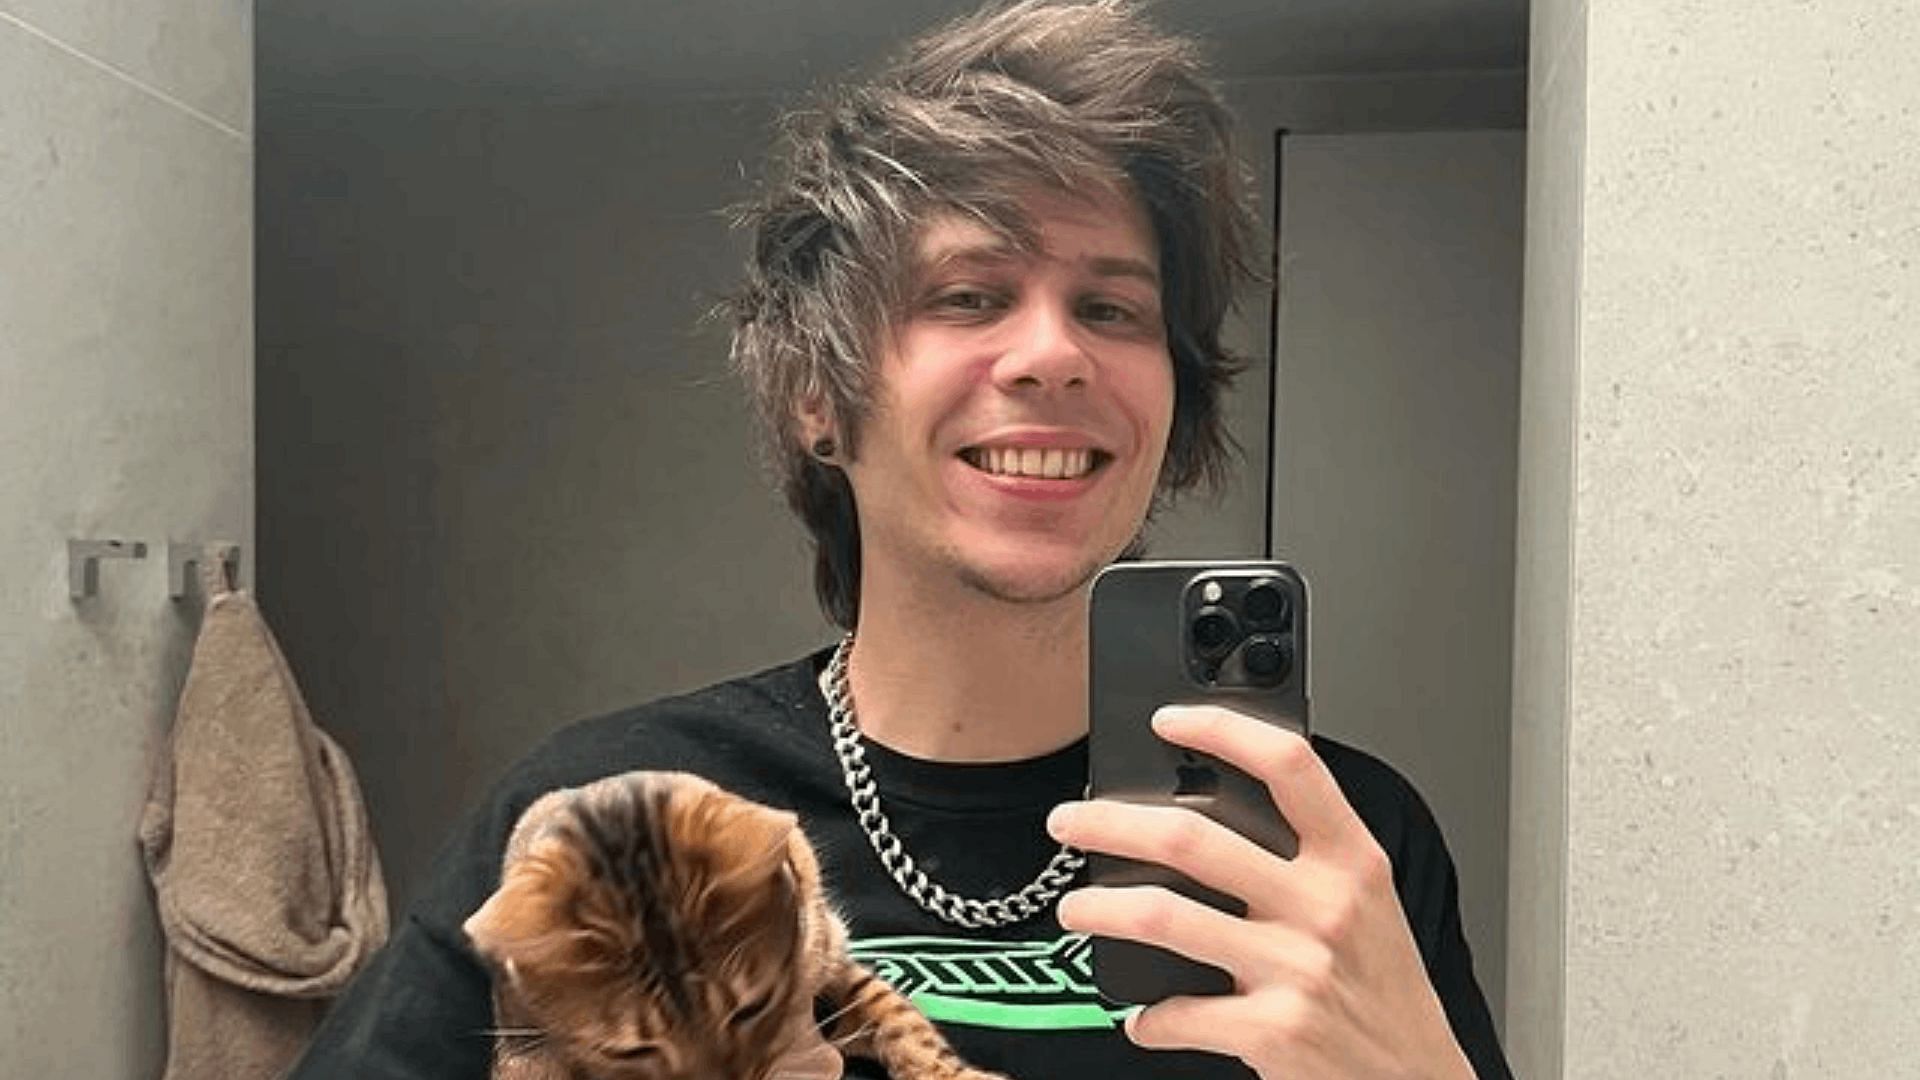 Rubius is a Spanish-speaking creator with over 14 million followers (Image via elrubiuswtf/Instagram)